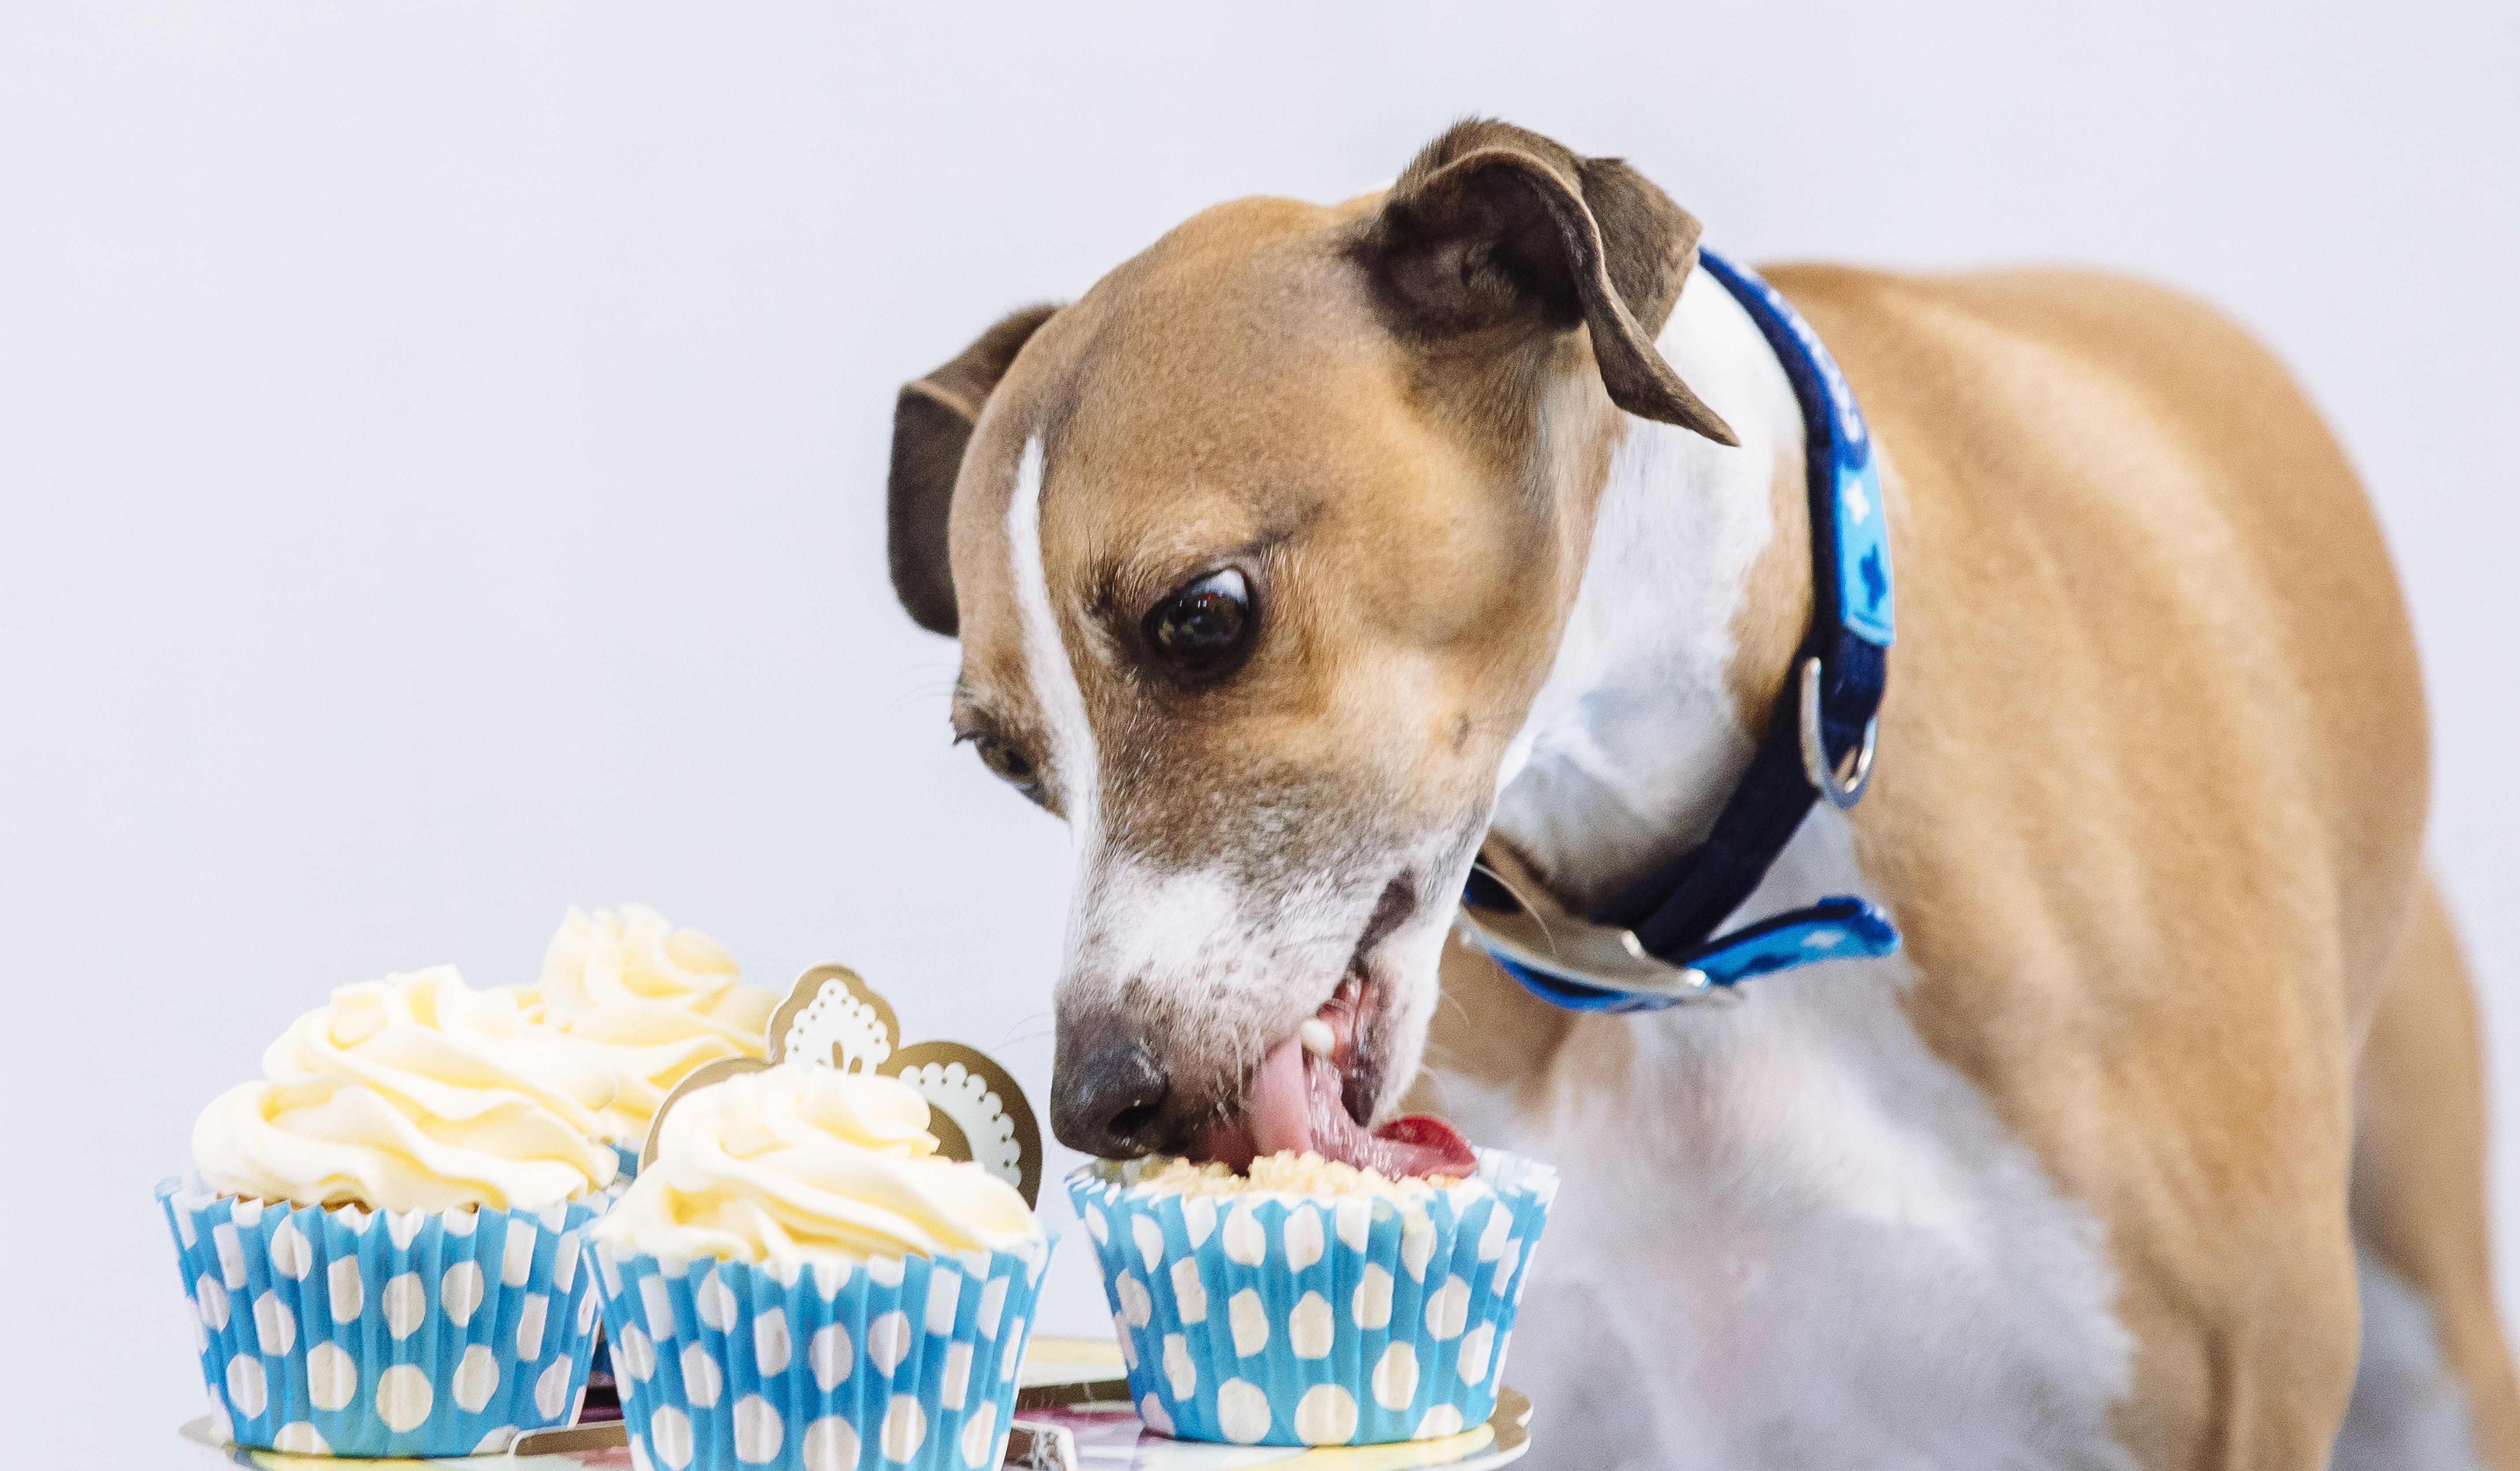 A lurcher type dog tucks into some dog-friendly cupcakes